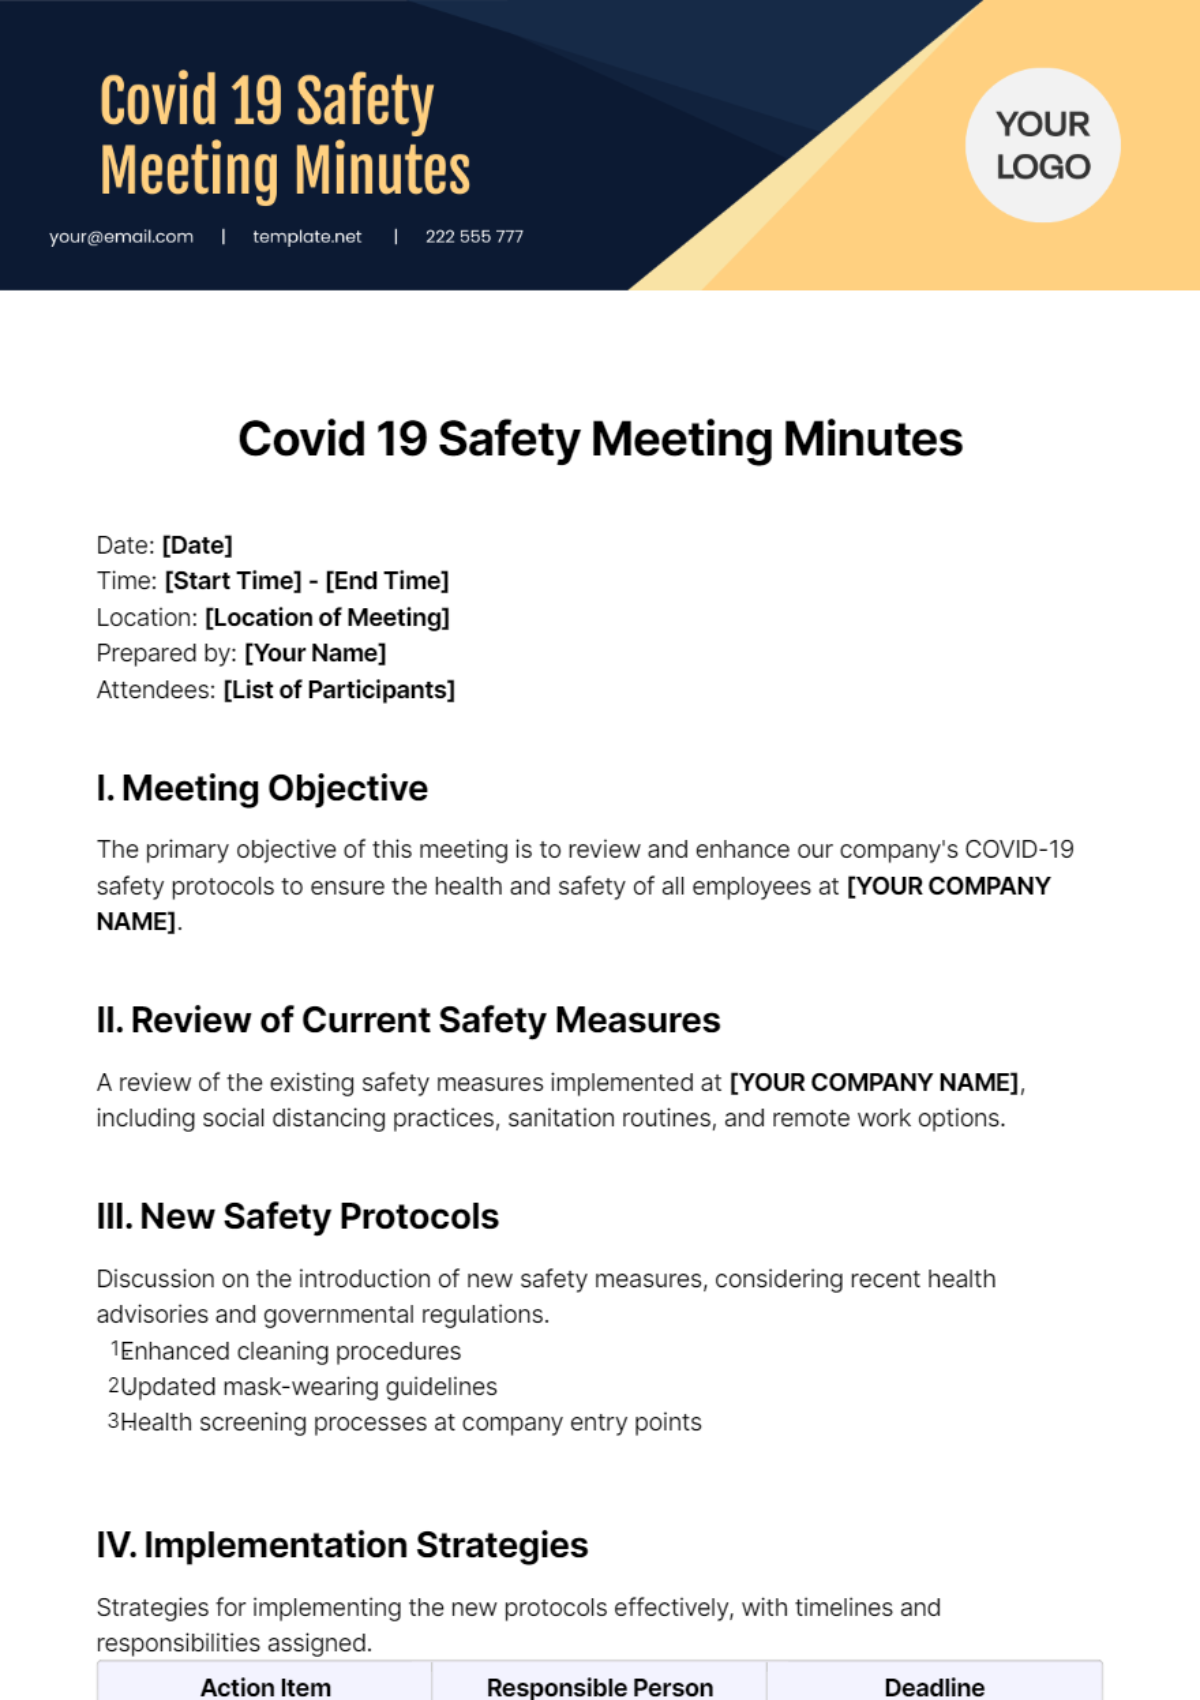 Covid 19 Safety Meeting Minutes Template